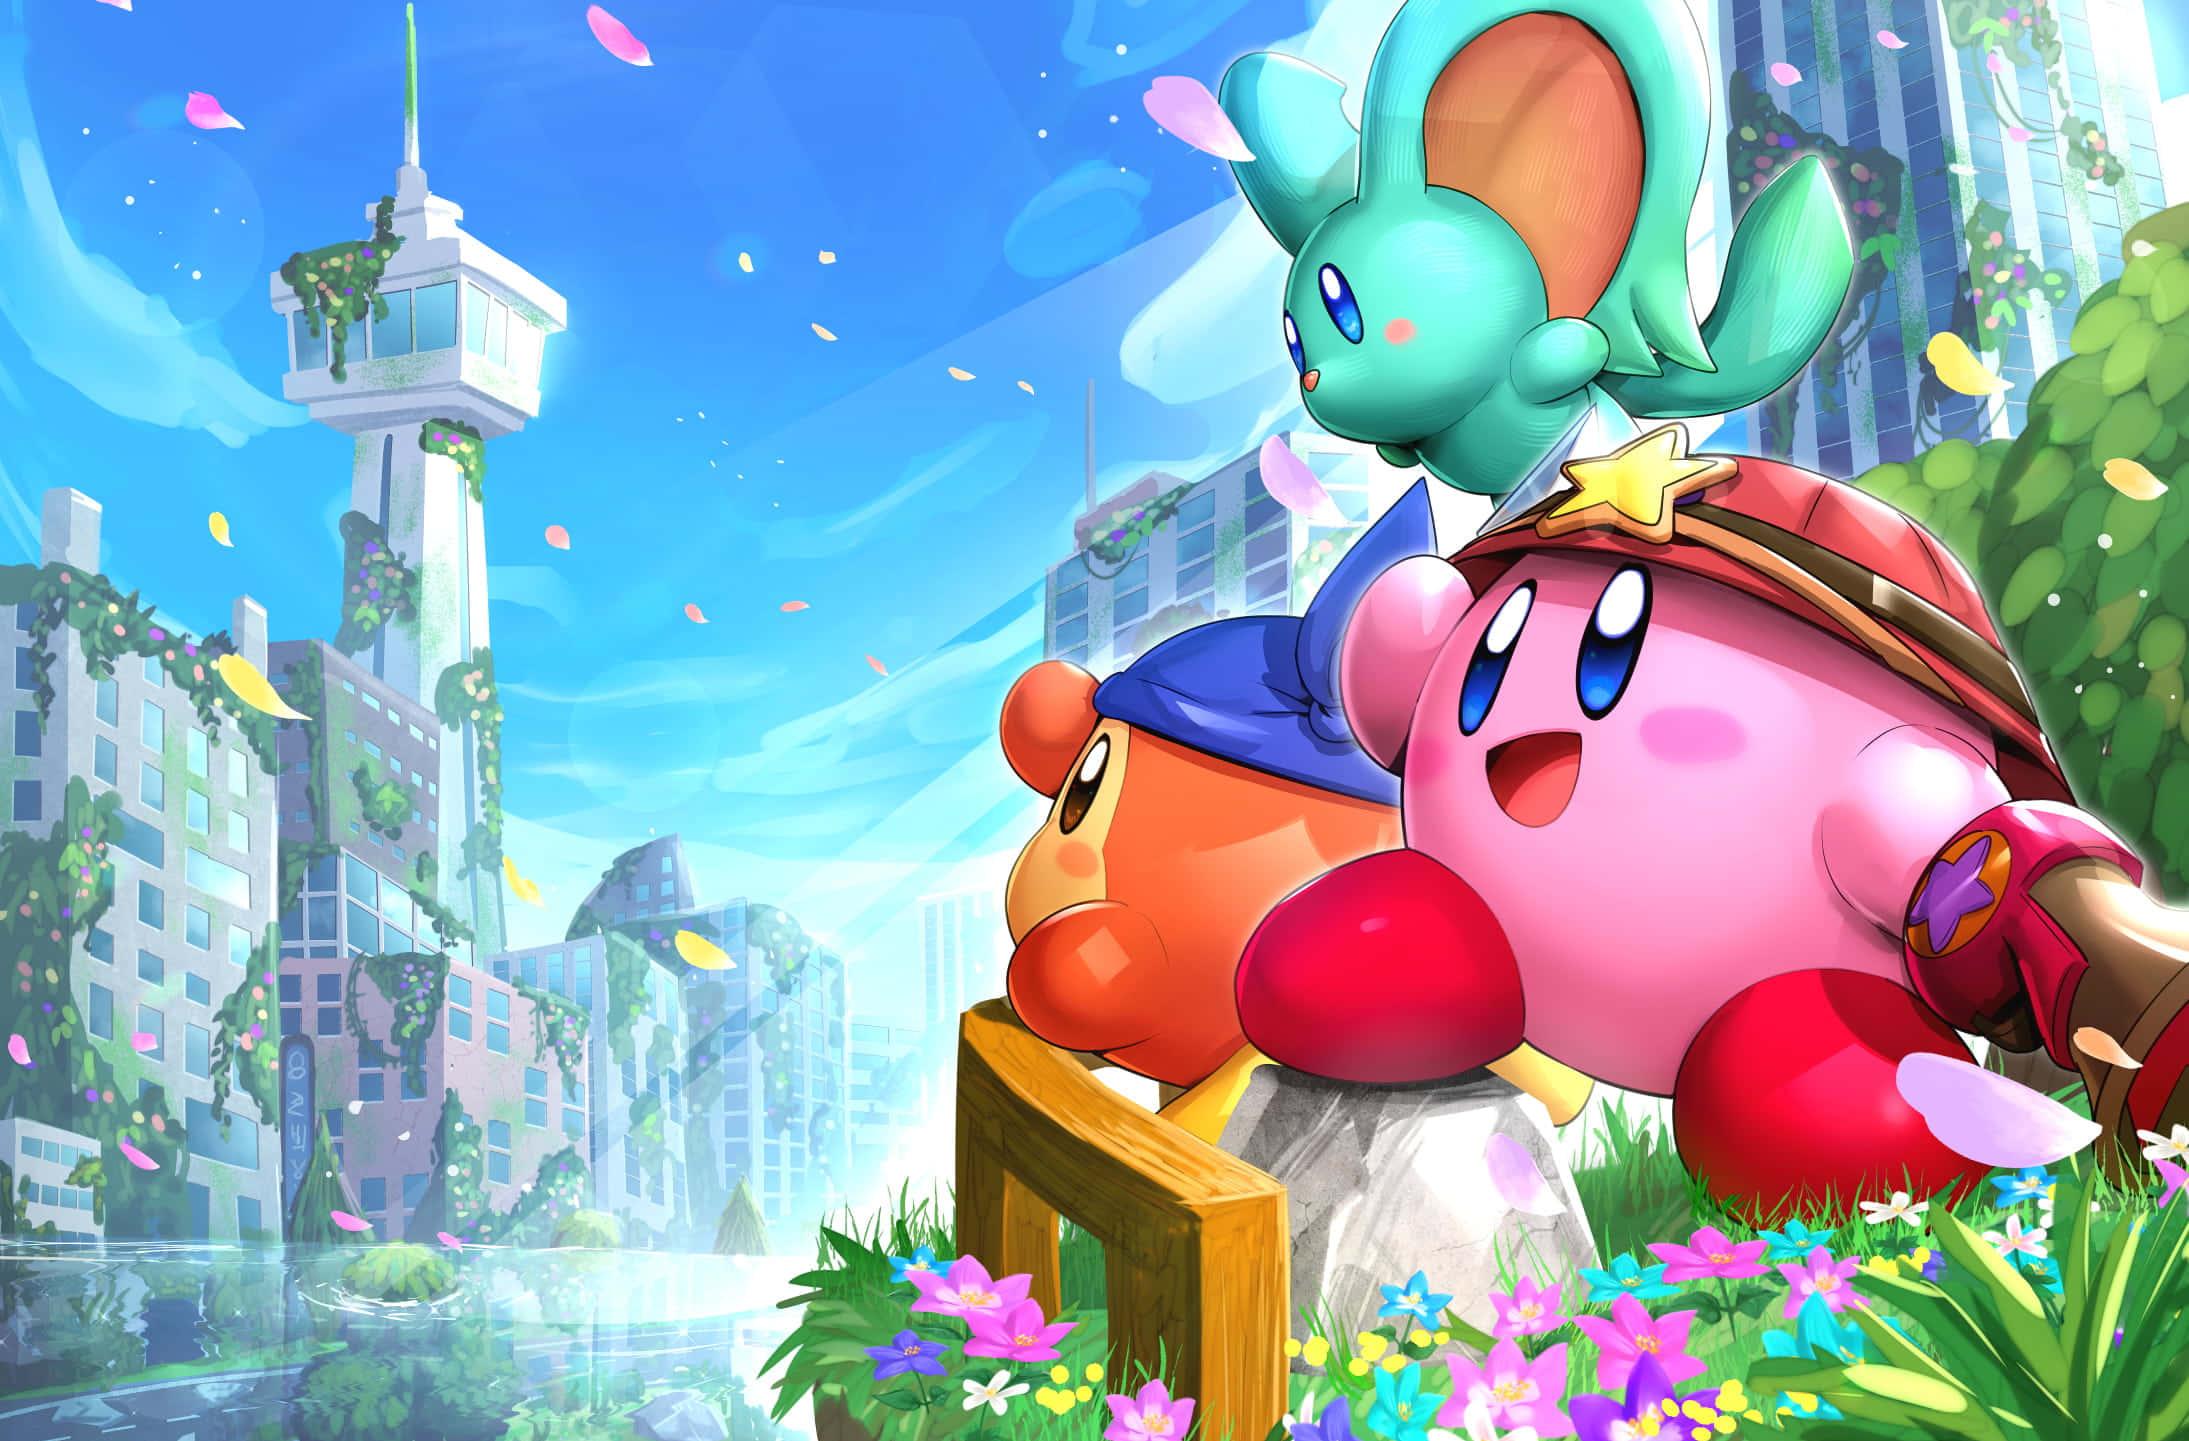 Download Enjoy a magical journey with the loveable Kirby